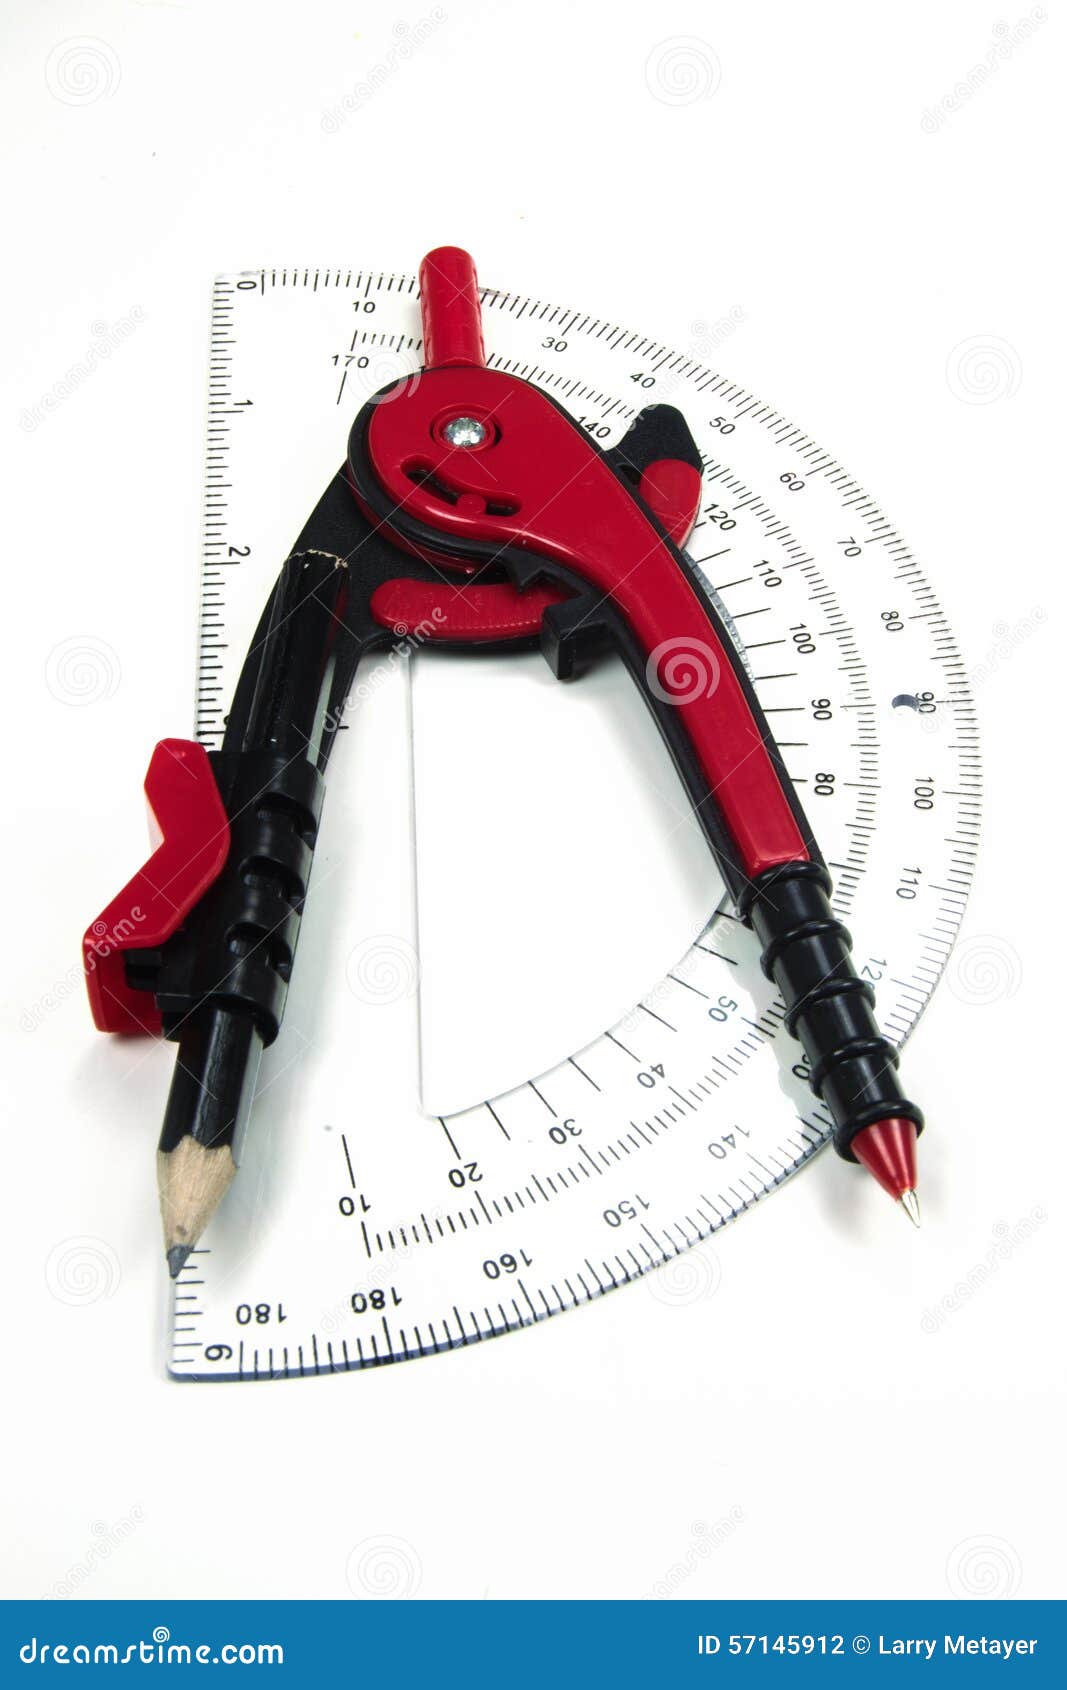 compass and protractor